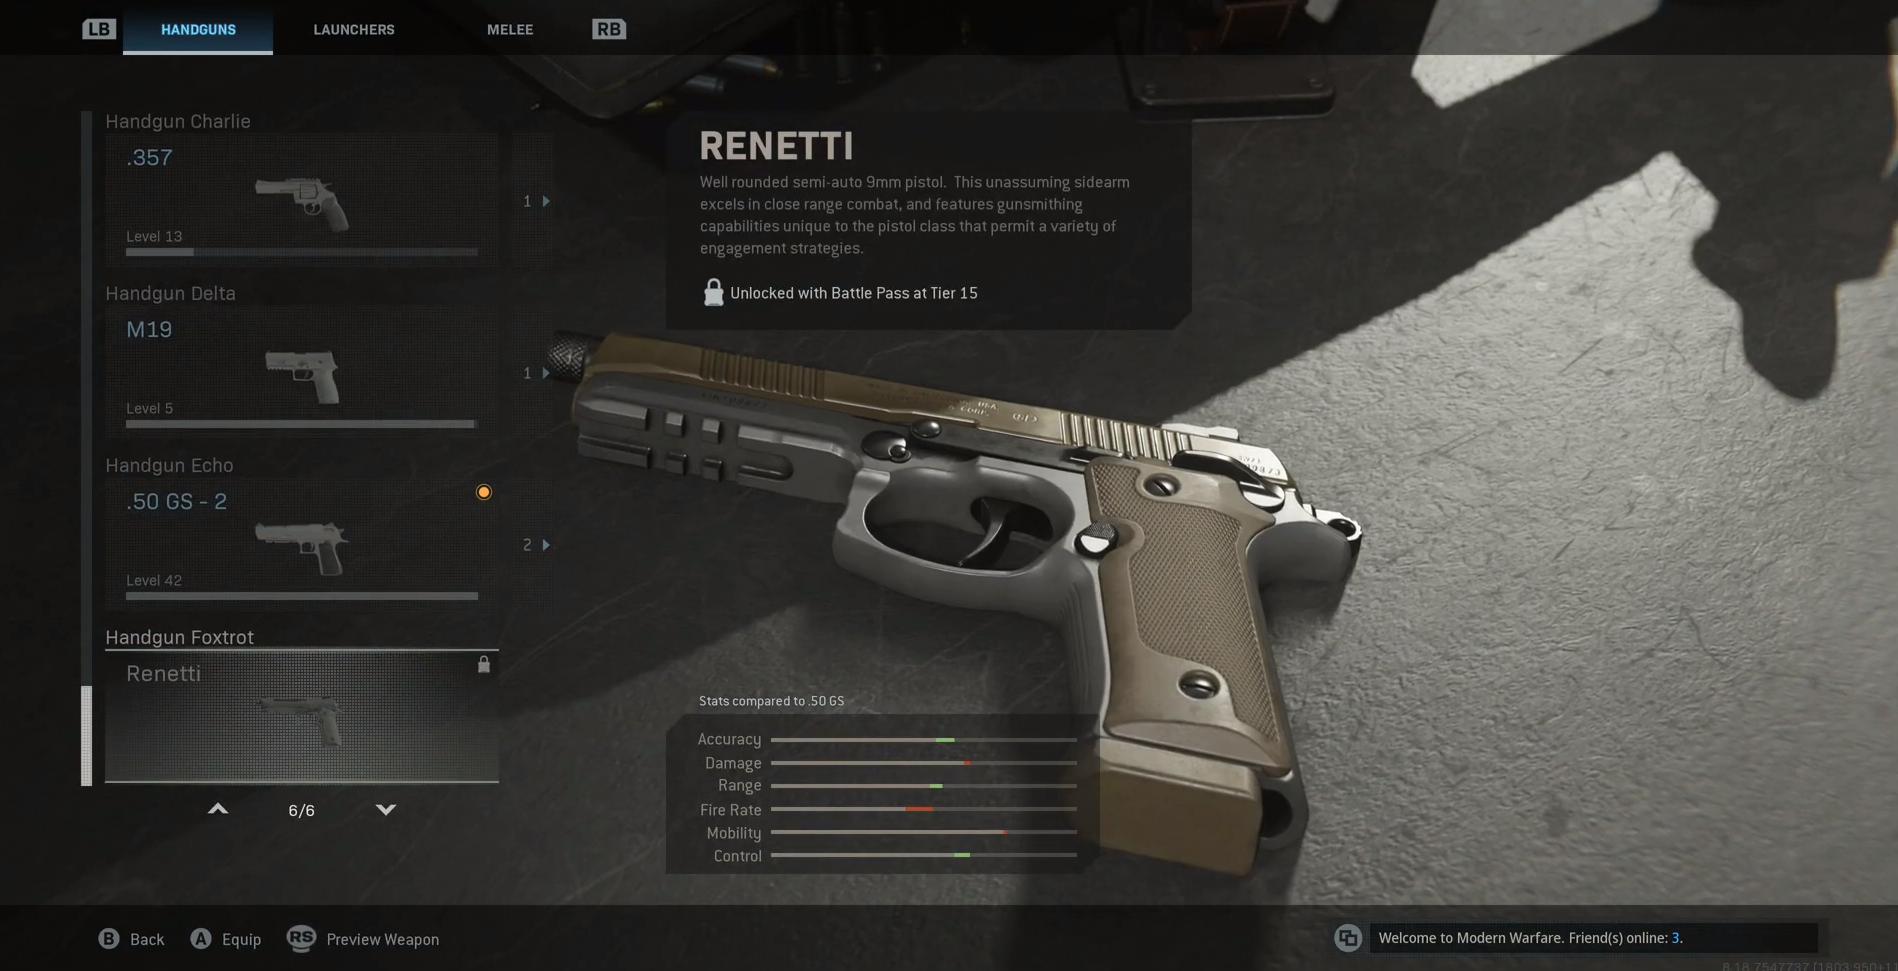 There's some interesting attachment options for the new Renetti handgun.